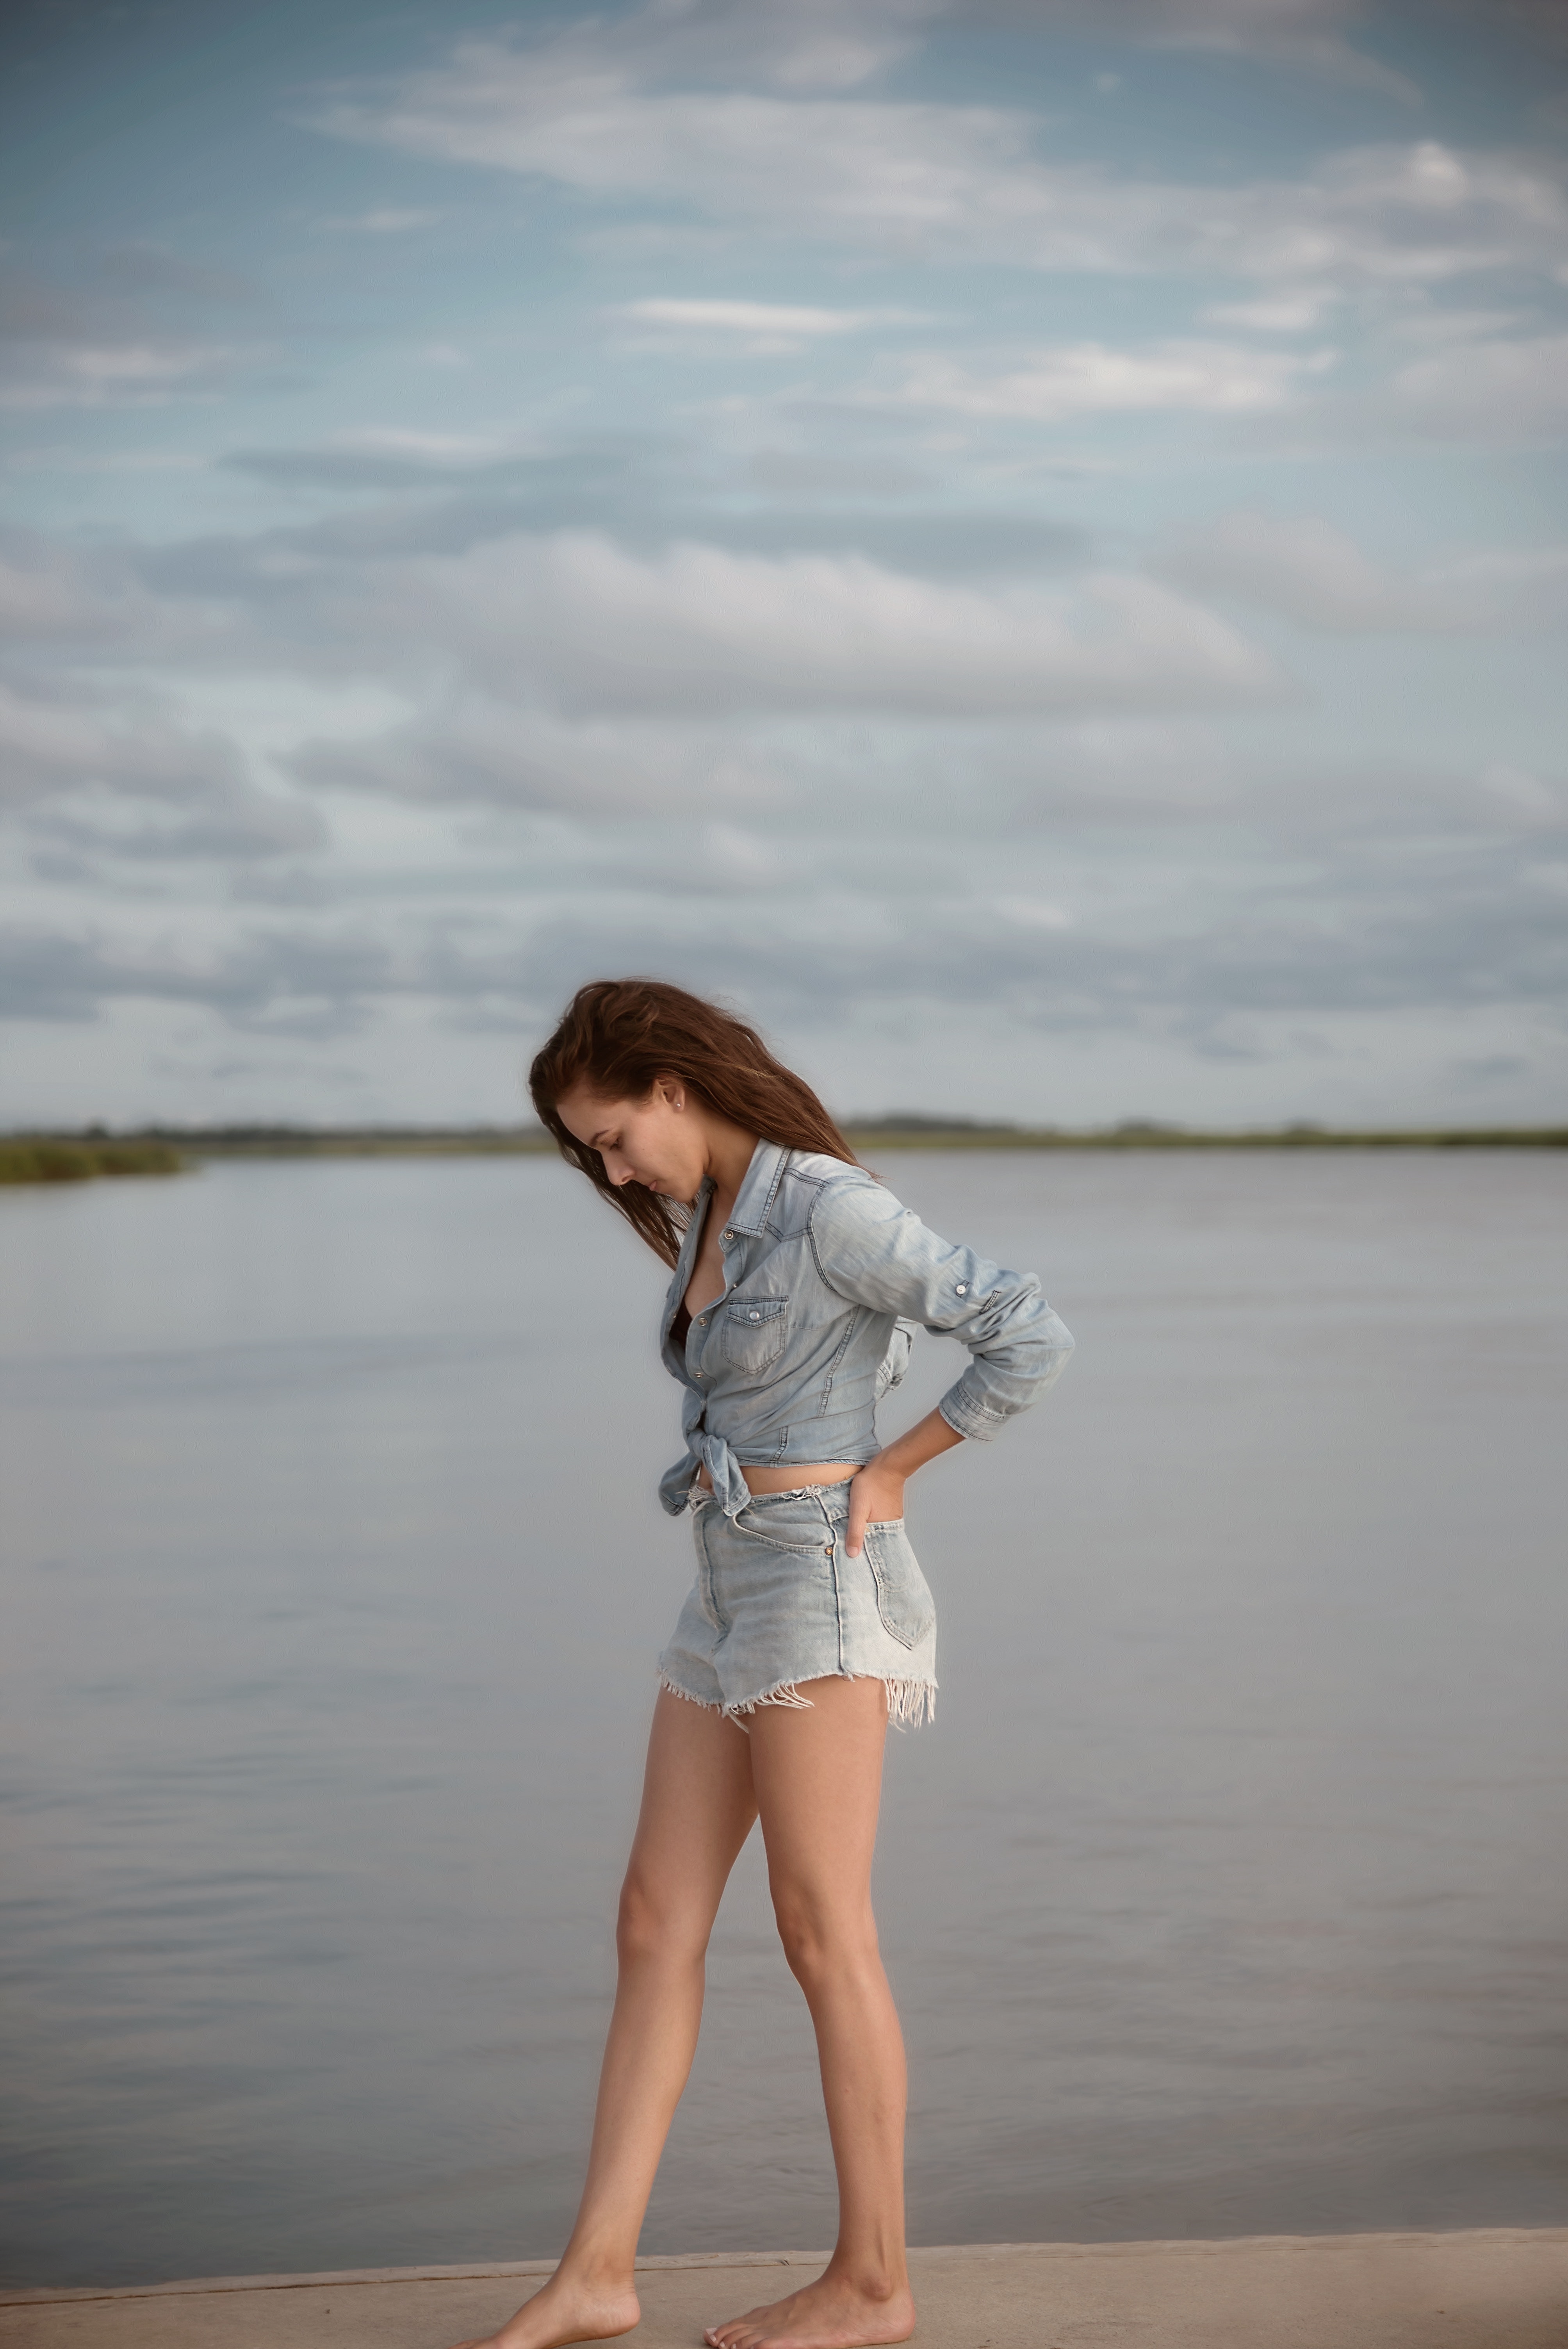 Woman wearing gray denim tie-front long-sleeved shirt and short shorts walking on isle near body of water photo